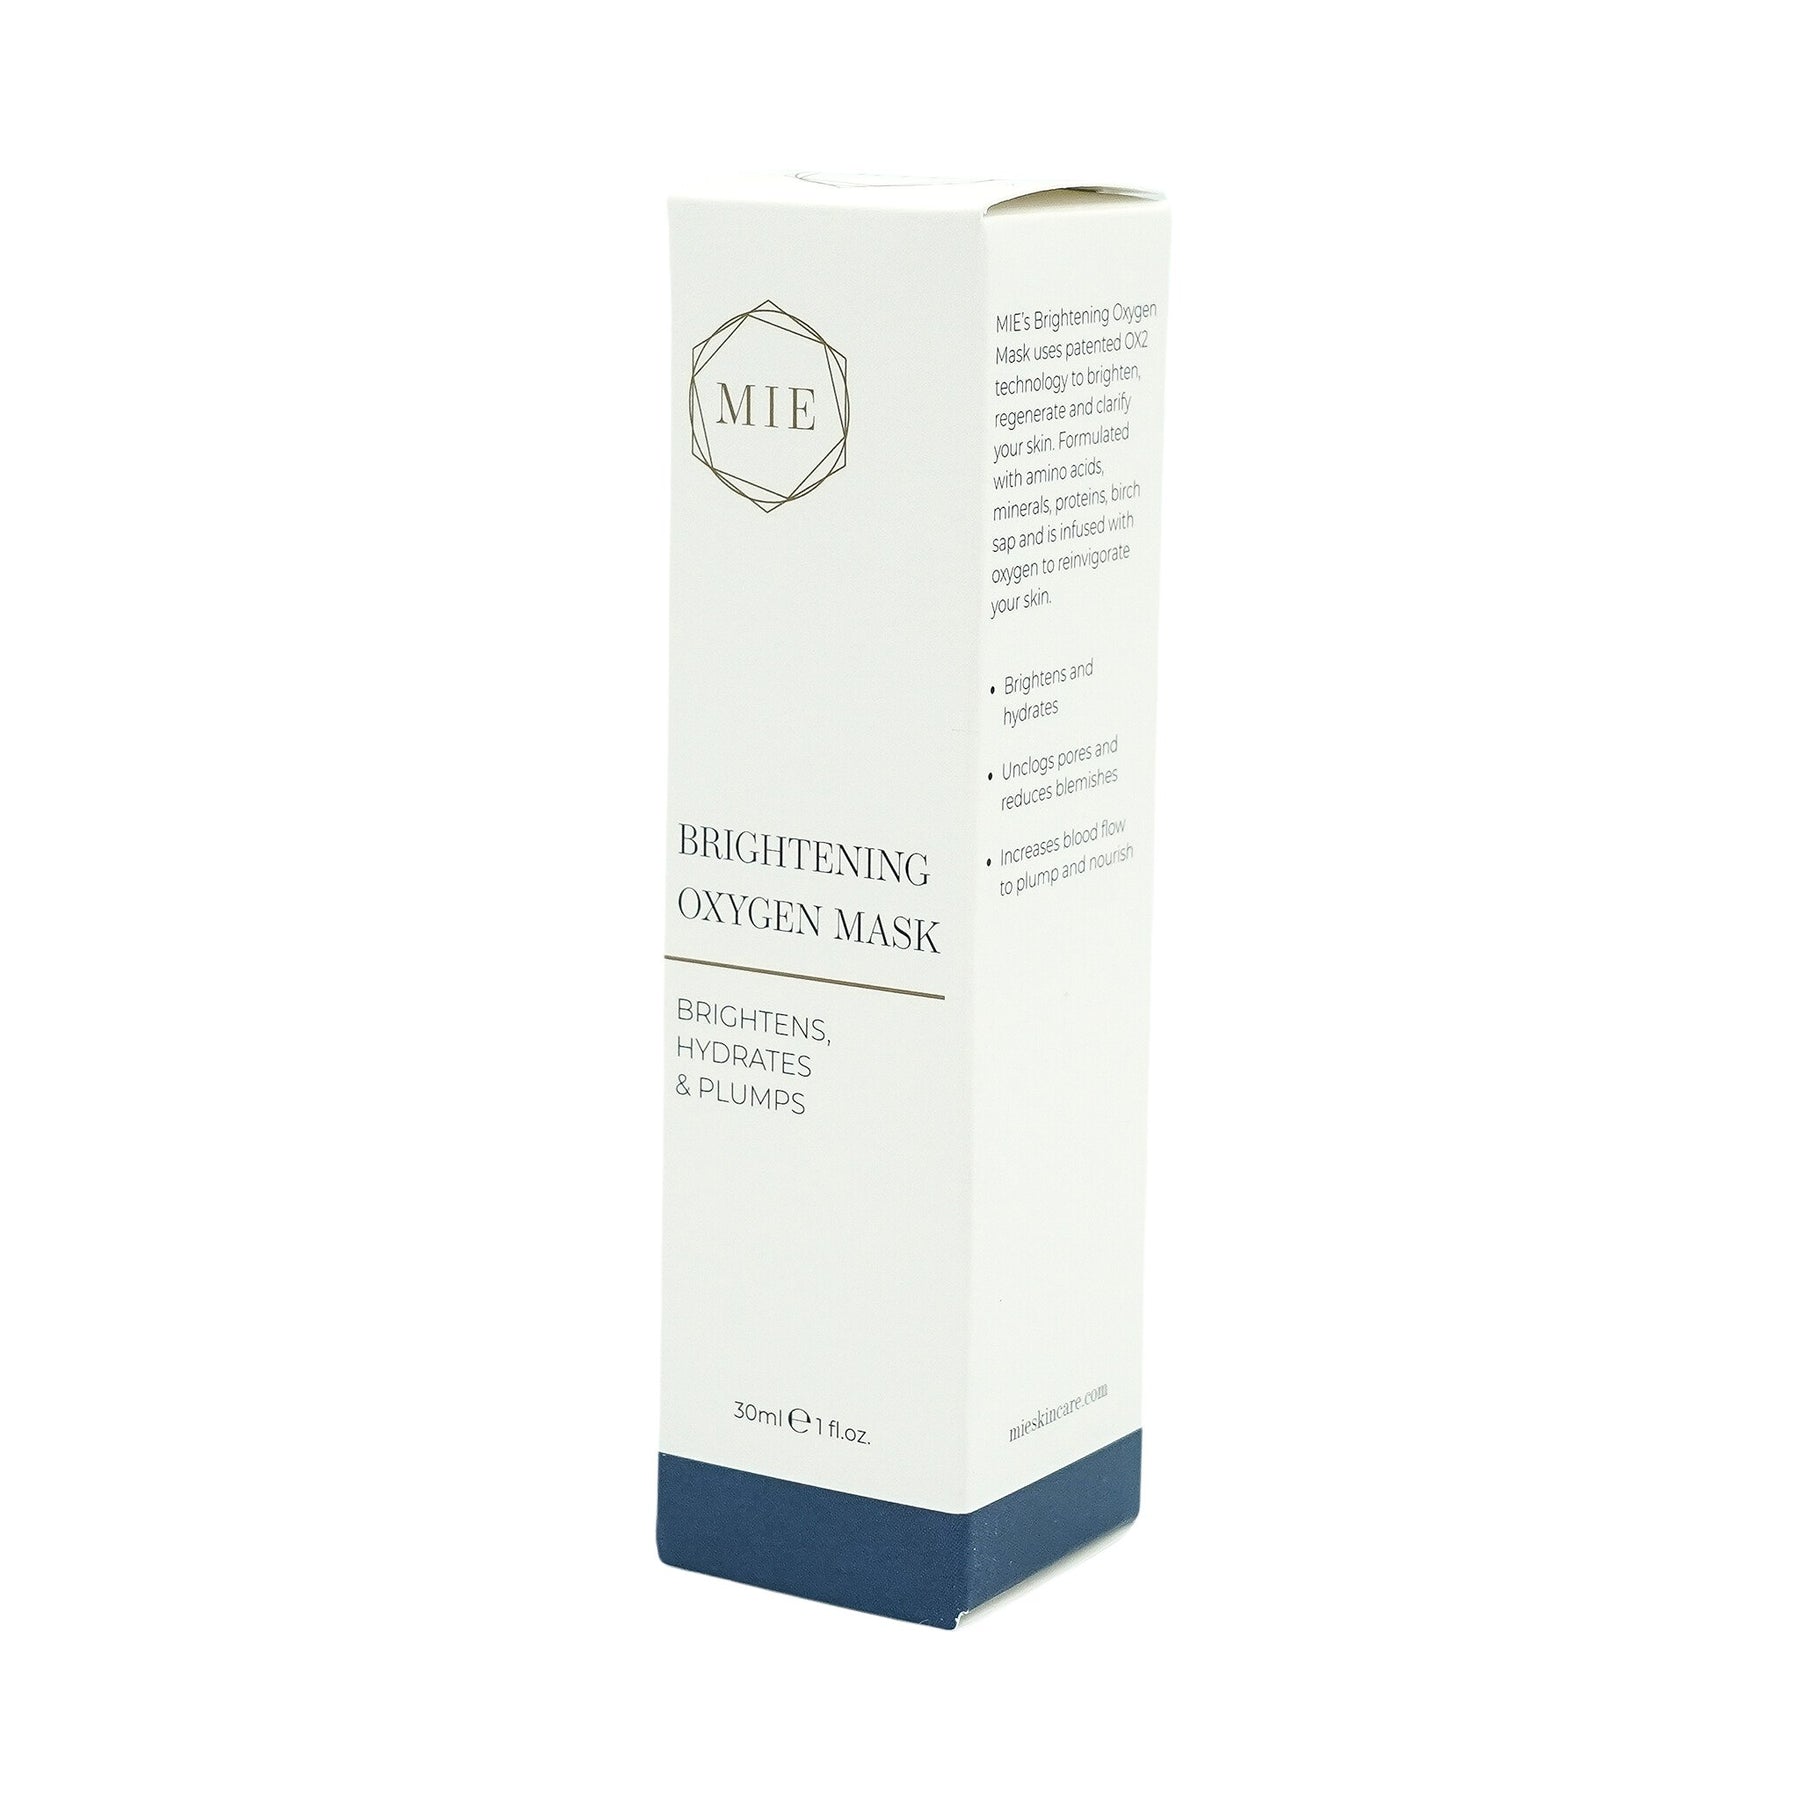 Brightening Oxygen Mask - MIE Skincare